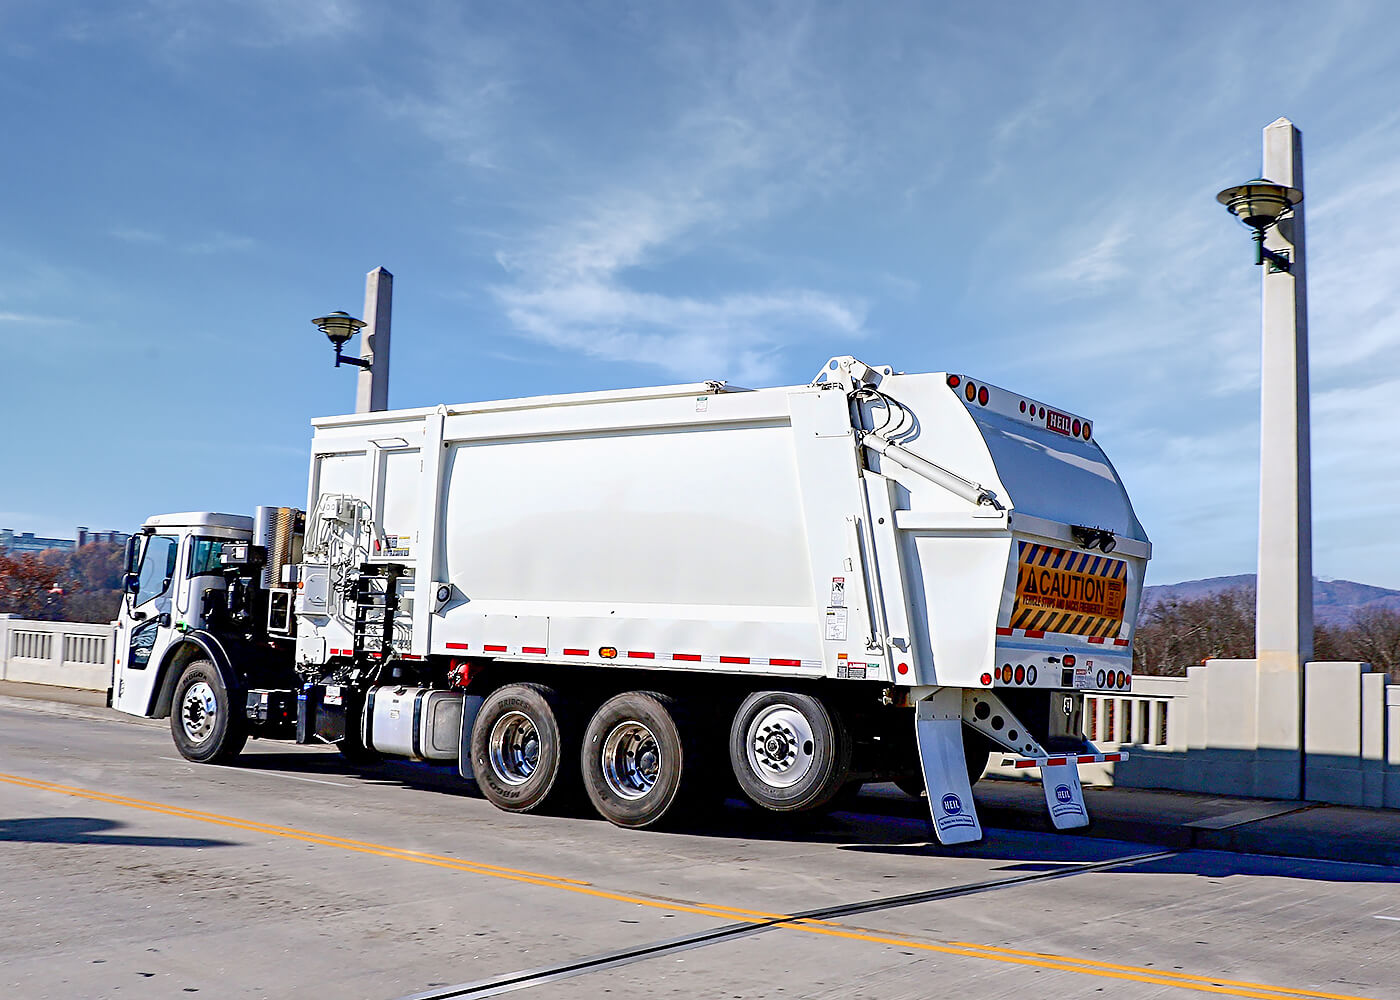 Command SST automated side load garbage truck